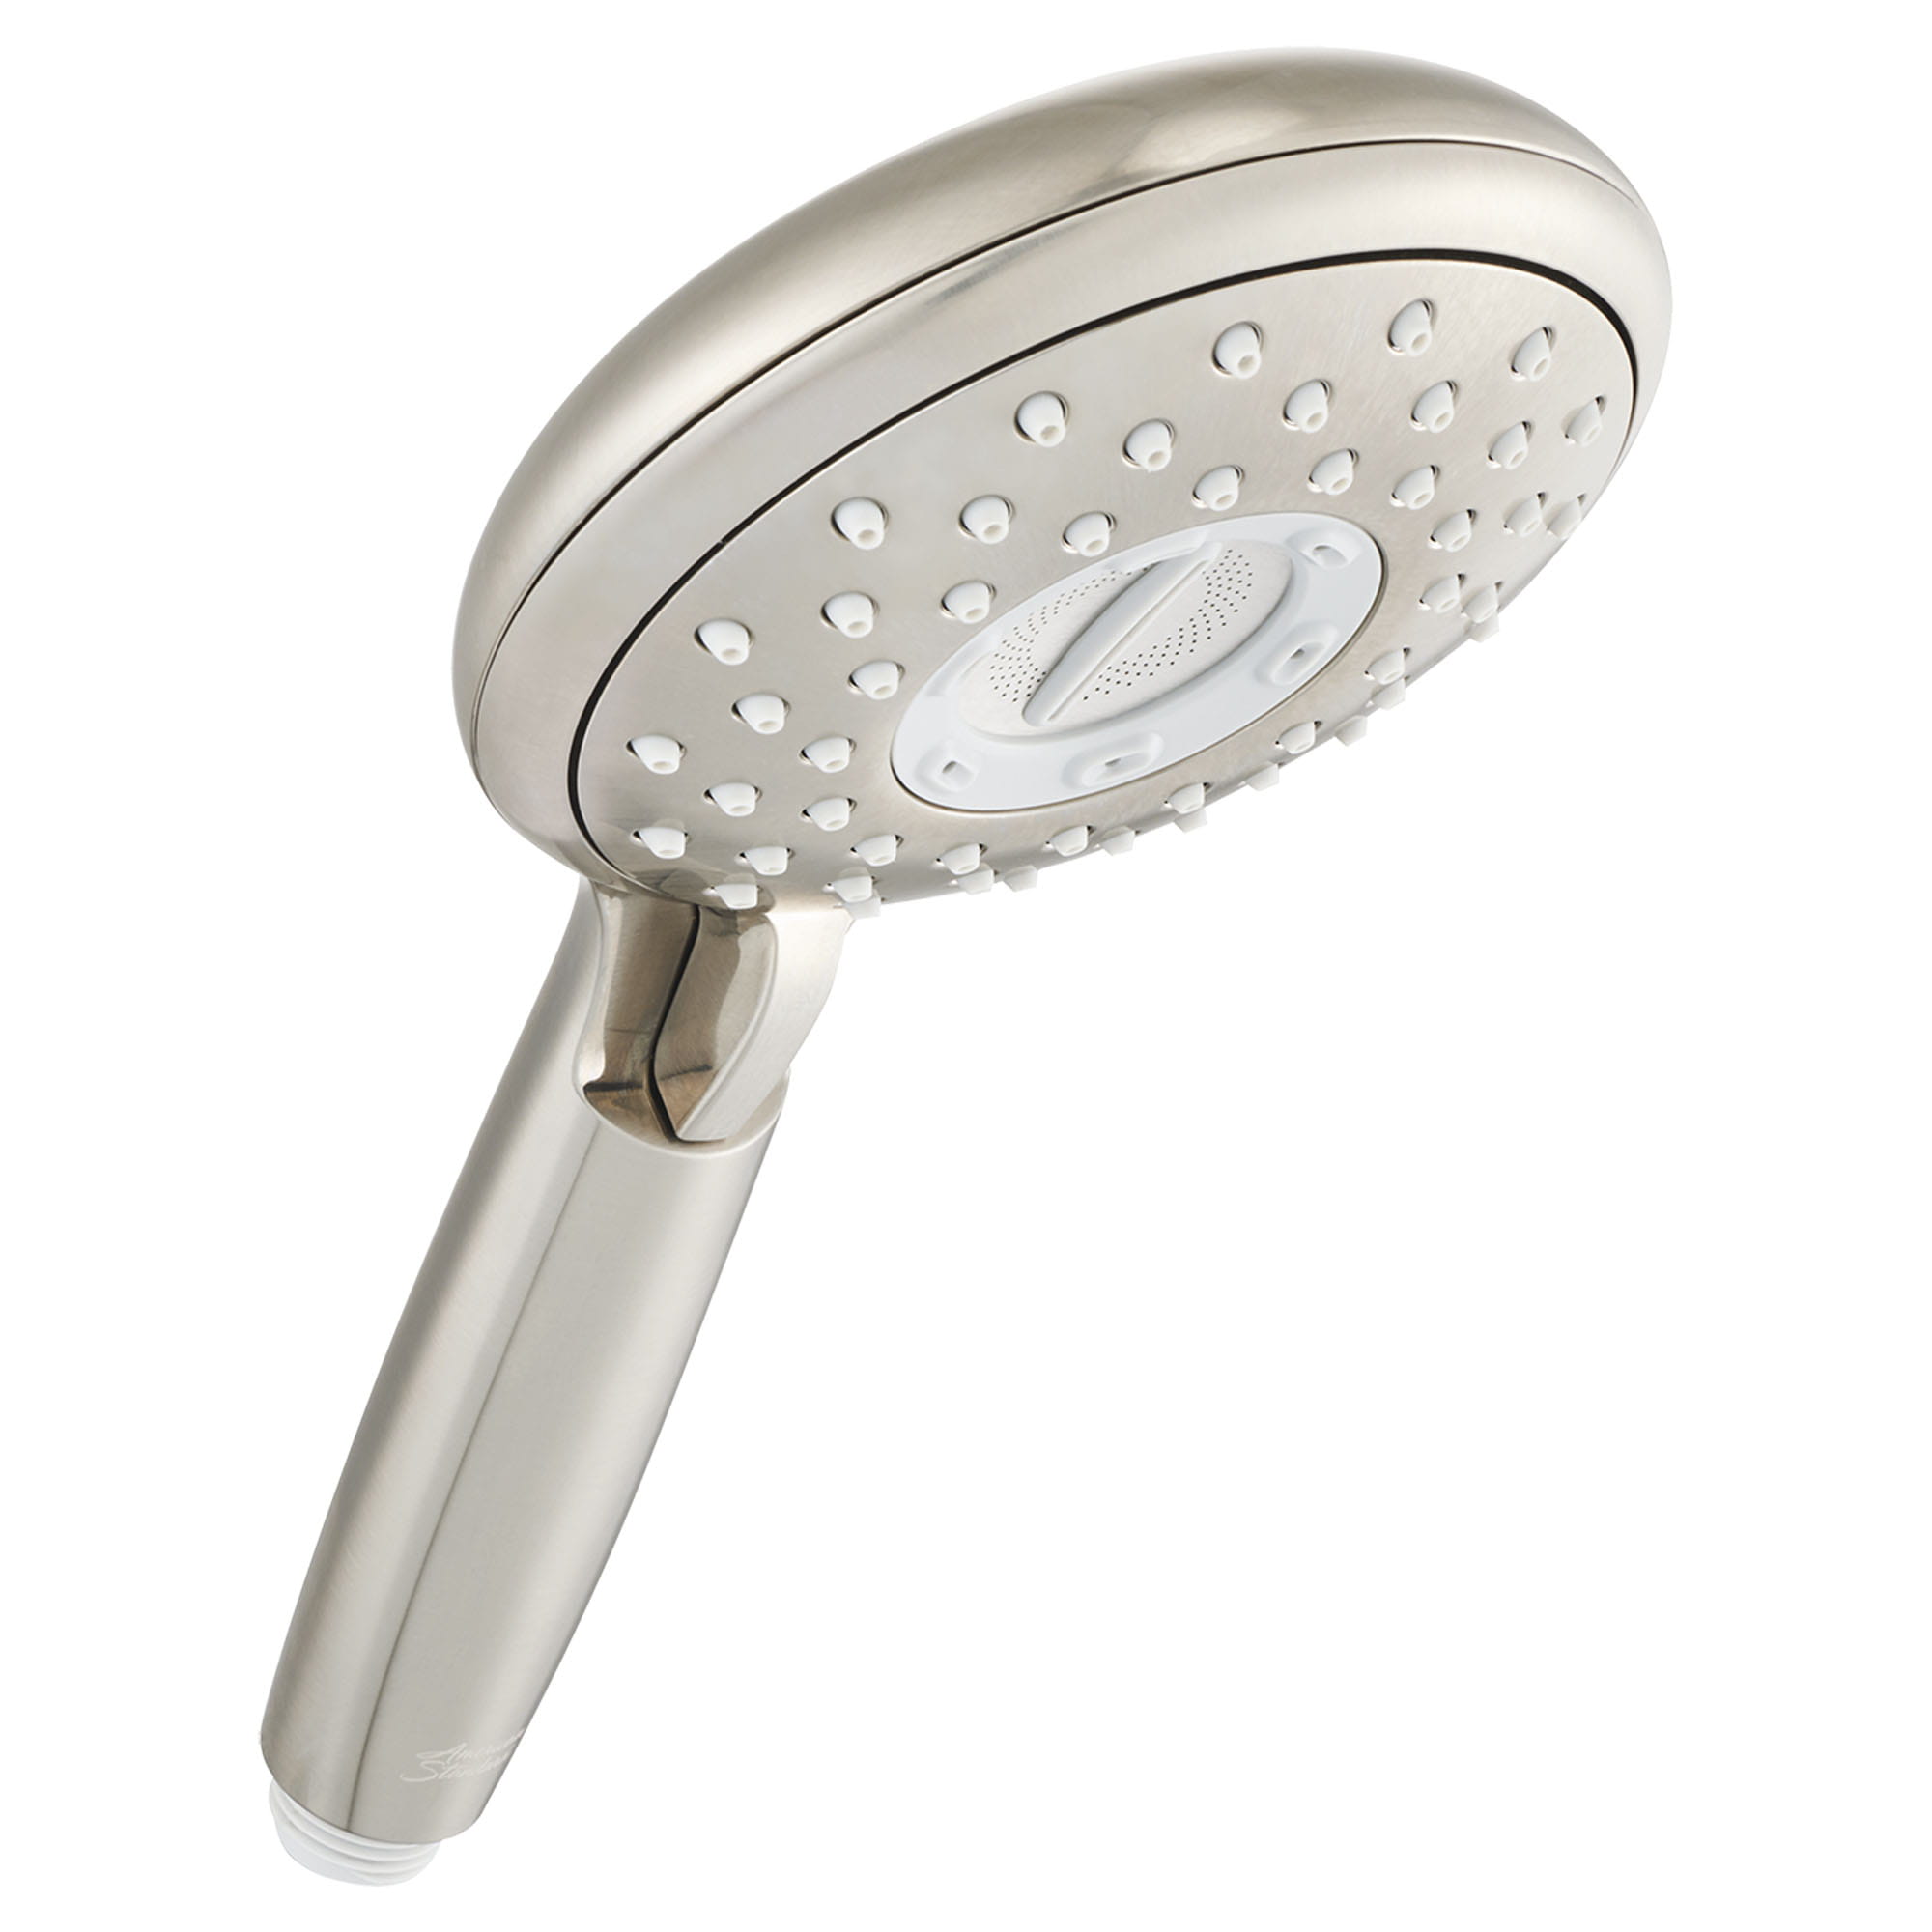 Spectra Handheld 18 gpm 68 L min 5 Inch 4 Function Hand Shower   BRUSHED NICKEL